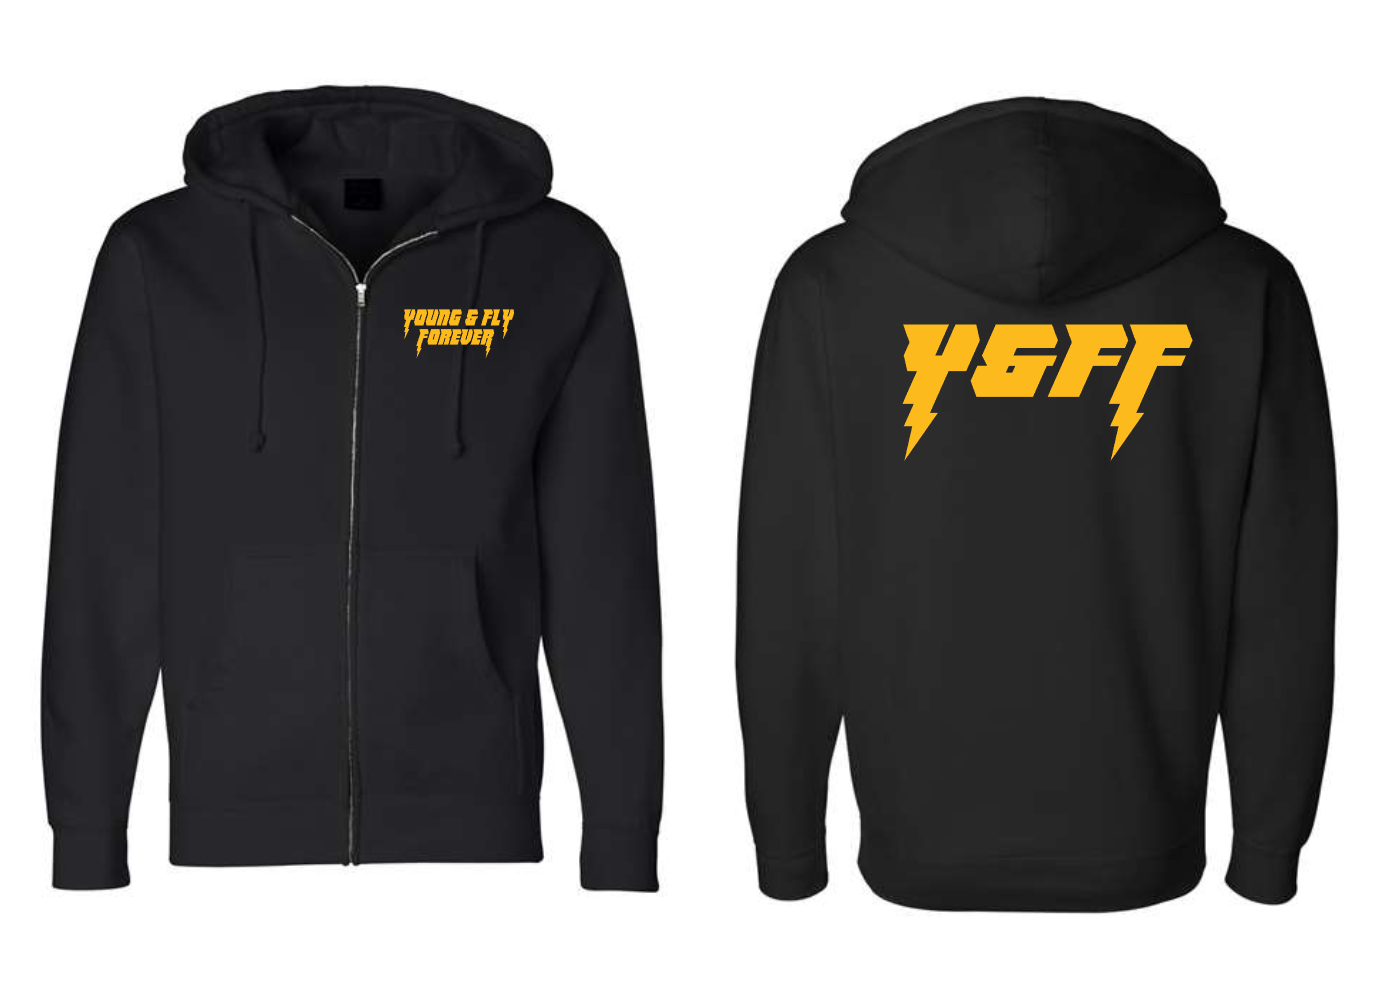 Copy of New BLACK Lightning zip up hoodie (limited YELLOW GOLD LOGO)